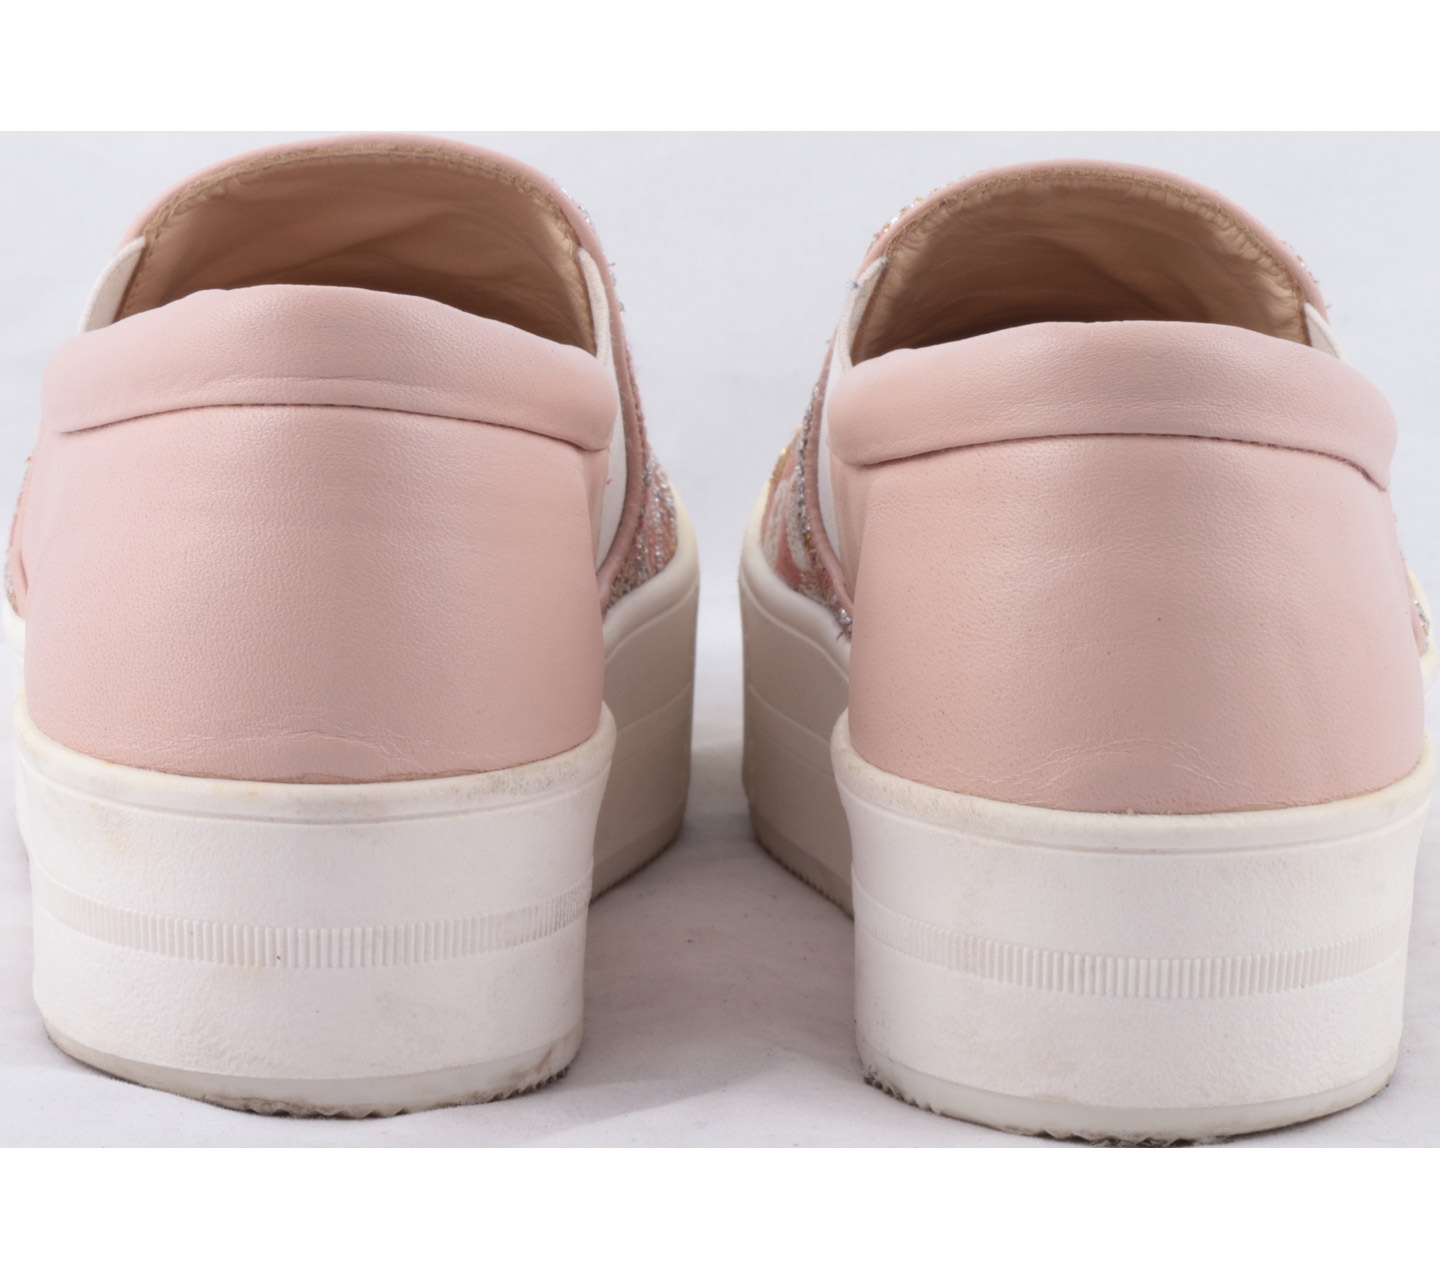 N°21 Pink And Off White Brocade Flats